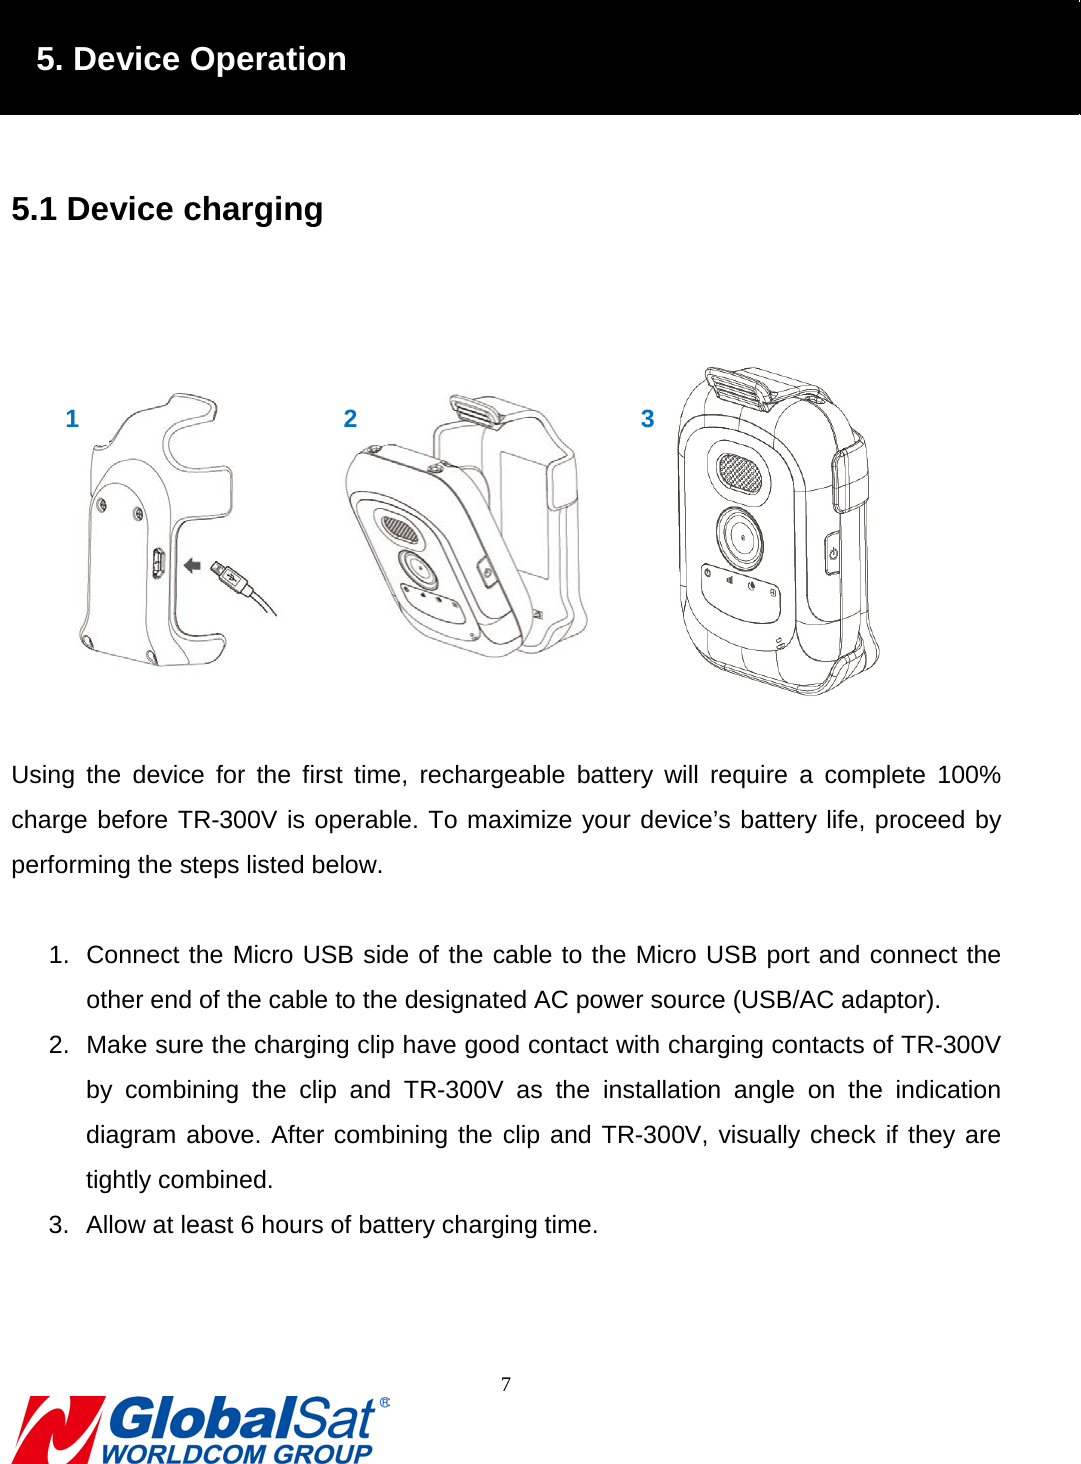                                                                                5. Device Operation  5.1 Device charging     Using the device for the first time, rechargeable battery will  require a complete 100% charge before TR-300V is operable. To maximize your device’s battery life, proceed by performing the steps listed below.  1. Connect the Micro USB side of the cable to the Micro USB port and connect the other end of the cable to the designated AC power source (USB/AC adaptor). 2. Make sure the charging clip have good contact with charging contacts of TR-300V by combining the clip and TR-300V  as the installation angle on the indication diagram above. After combining the clip and TR-300V, visually check if they are tightly combined. 3. Allow at least 6 hours of battery charging time.     1 2 3 7  